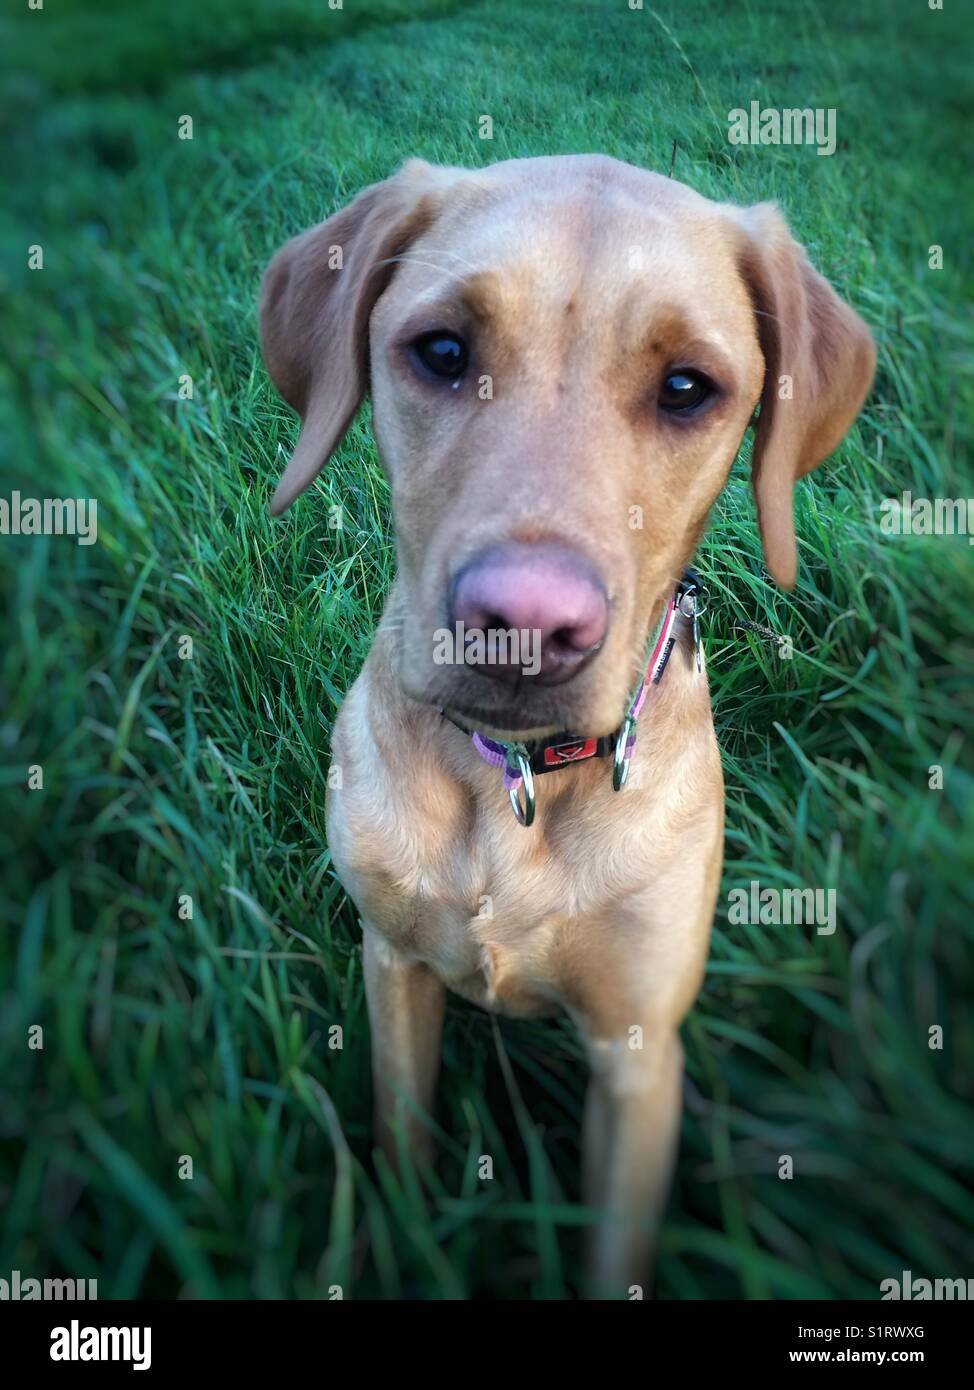 A golden labrador retriever working dog in a grassy field and looking at the camera Stock Photo